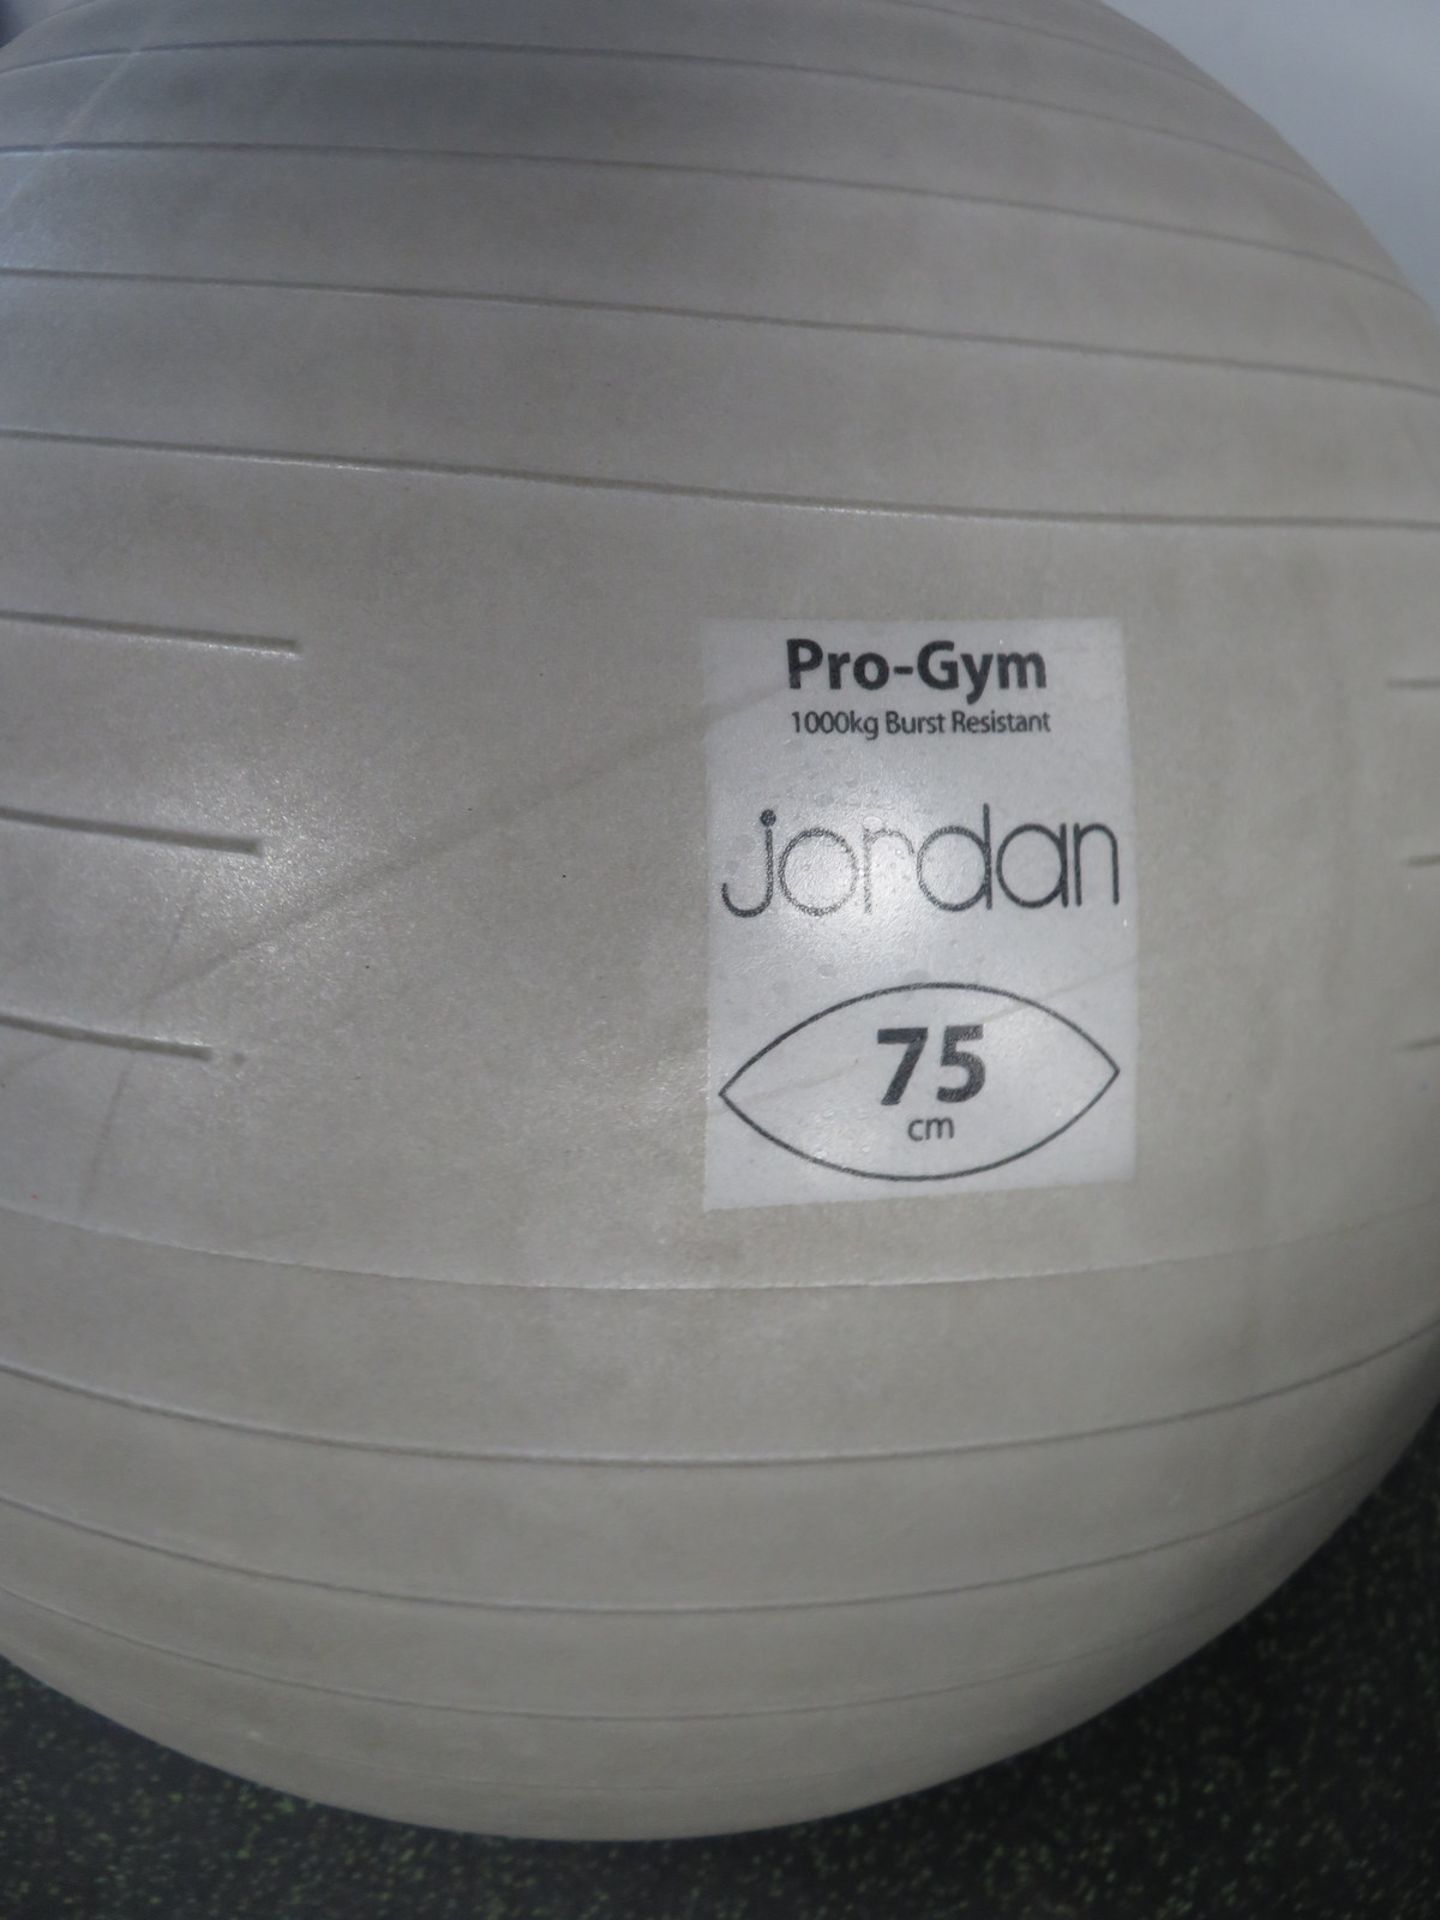 6x Pilates/Yoga Exercise Balls With 2 Stands - Various Sizes. - Image 5 of 6